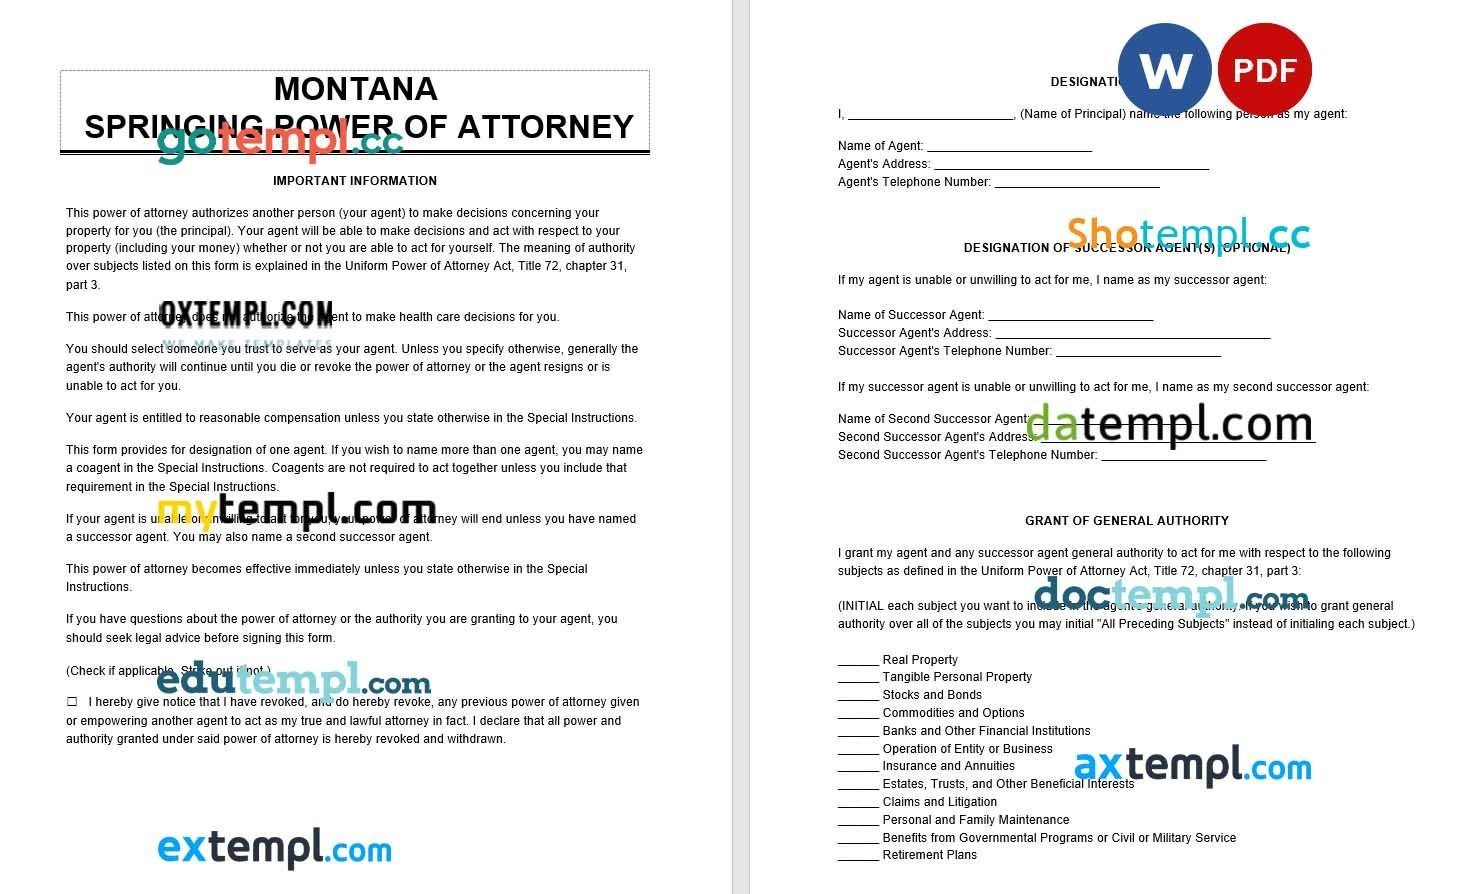 Montana Springing Power of Attorney example, fully editable